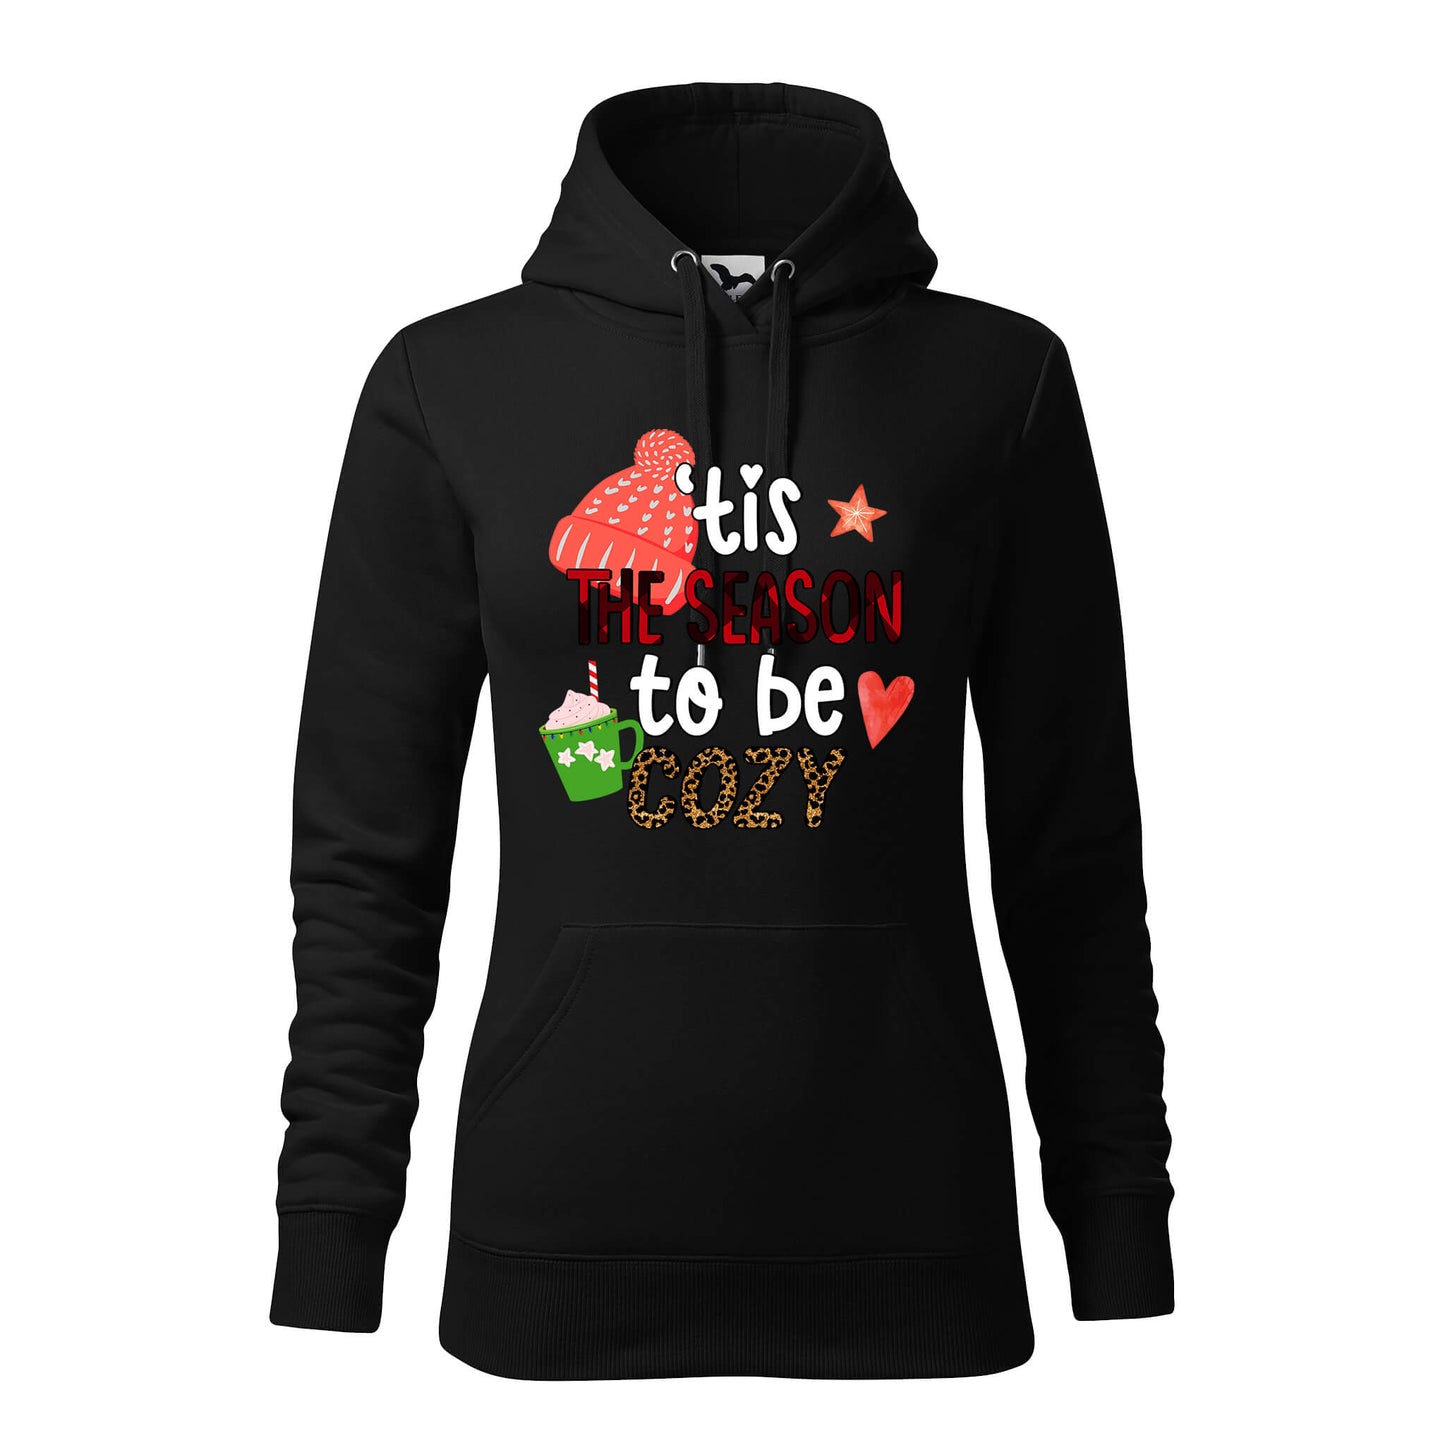 This the season to be cozy hoodie - rvdesignprint